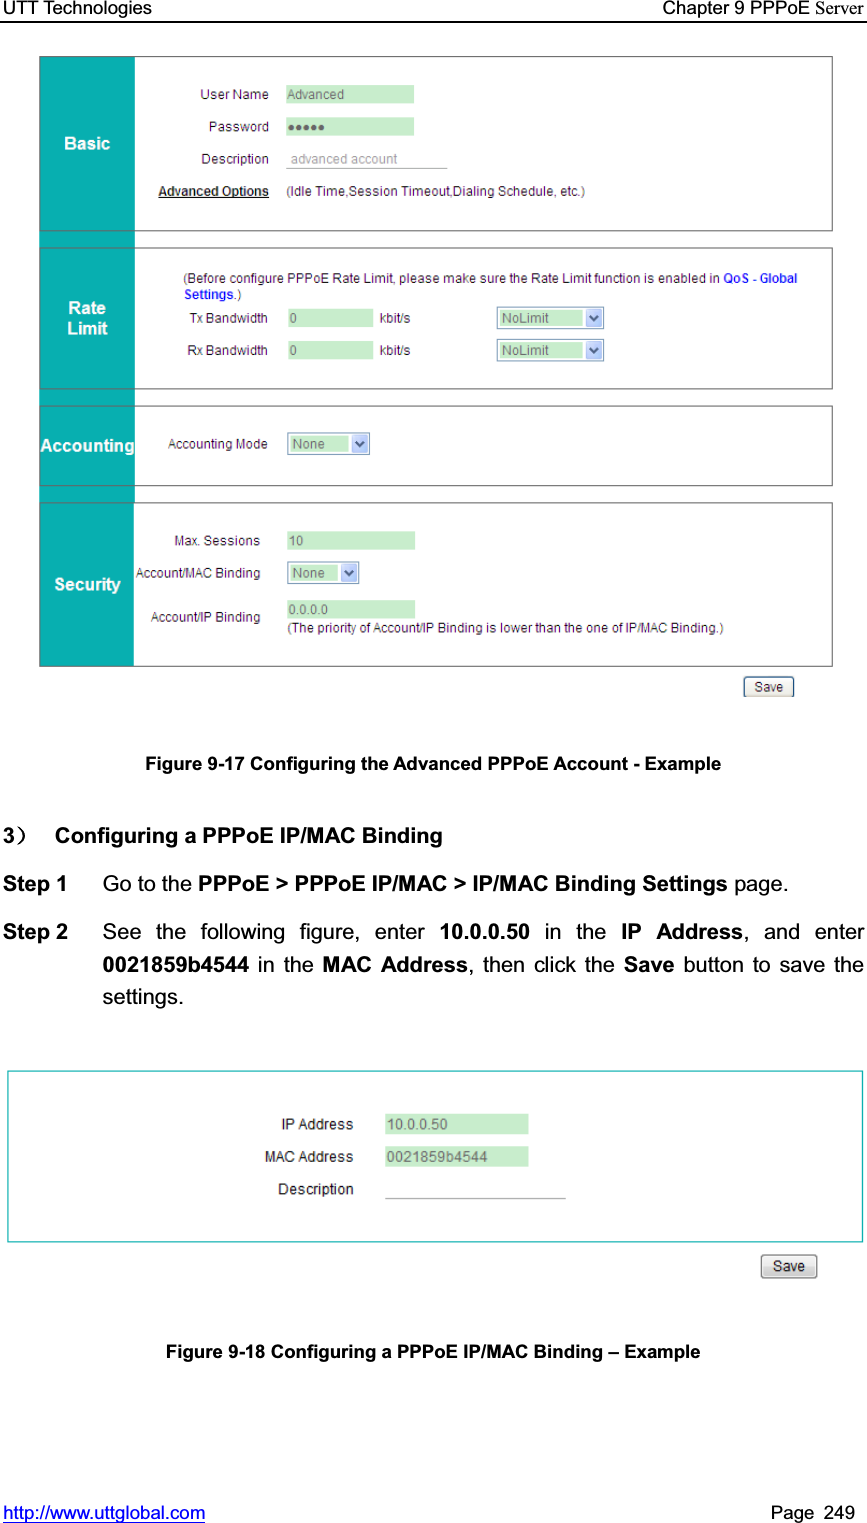 UTT Technologies    Chapter 9 PPPoE Serverhttp://www.uttglobal.com Page 249 Figure 9-17 Configuring the Advanced PPPoE Account - Example 3˅  Configuring a PPPoE IP/MAC Binding   Step 1  Go to the PPPoE &gt; PPPoE IP/MAC &gt; IP/MAC Binding Settings page. Step 2  See the following figure, enter 10.0.0.50 in the IP Address, and enter 0021859b4544 in the MAC Address, then click the Save button to save the settings. Figure 9-18 Configuring a PPPoE IP/MAC Binding ± Example 